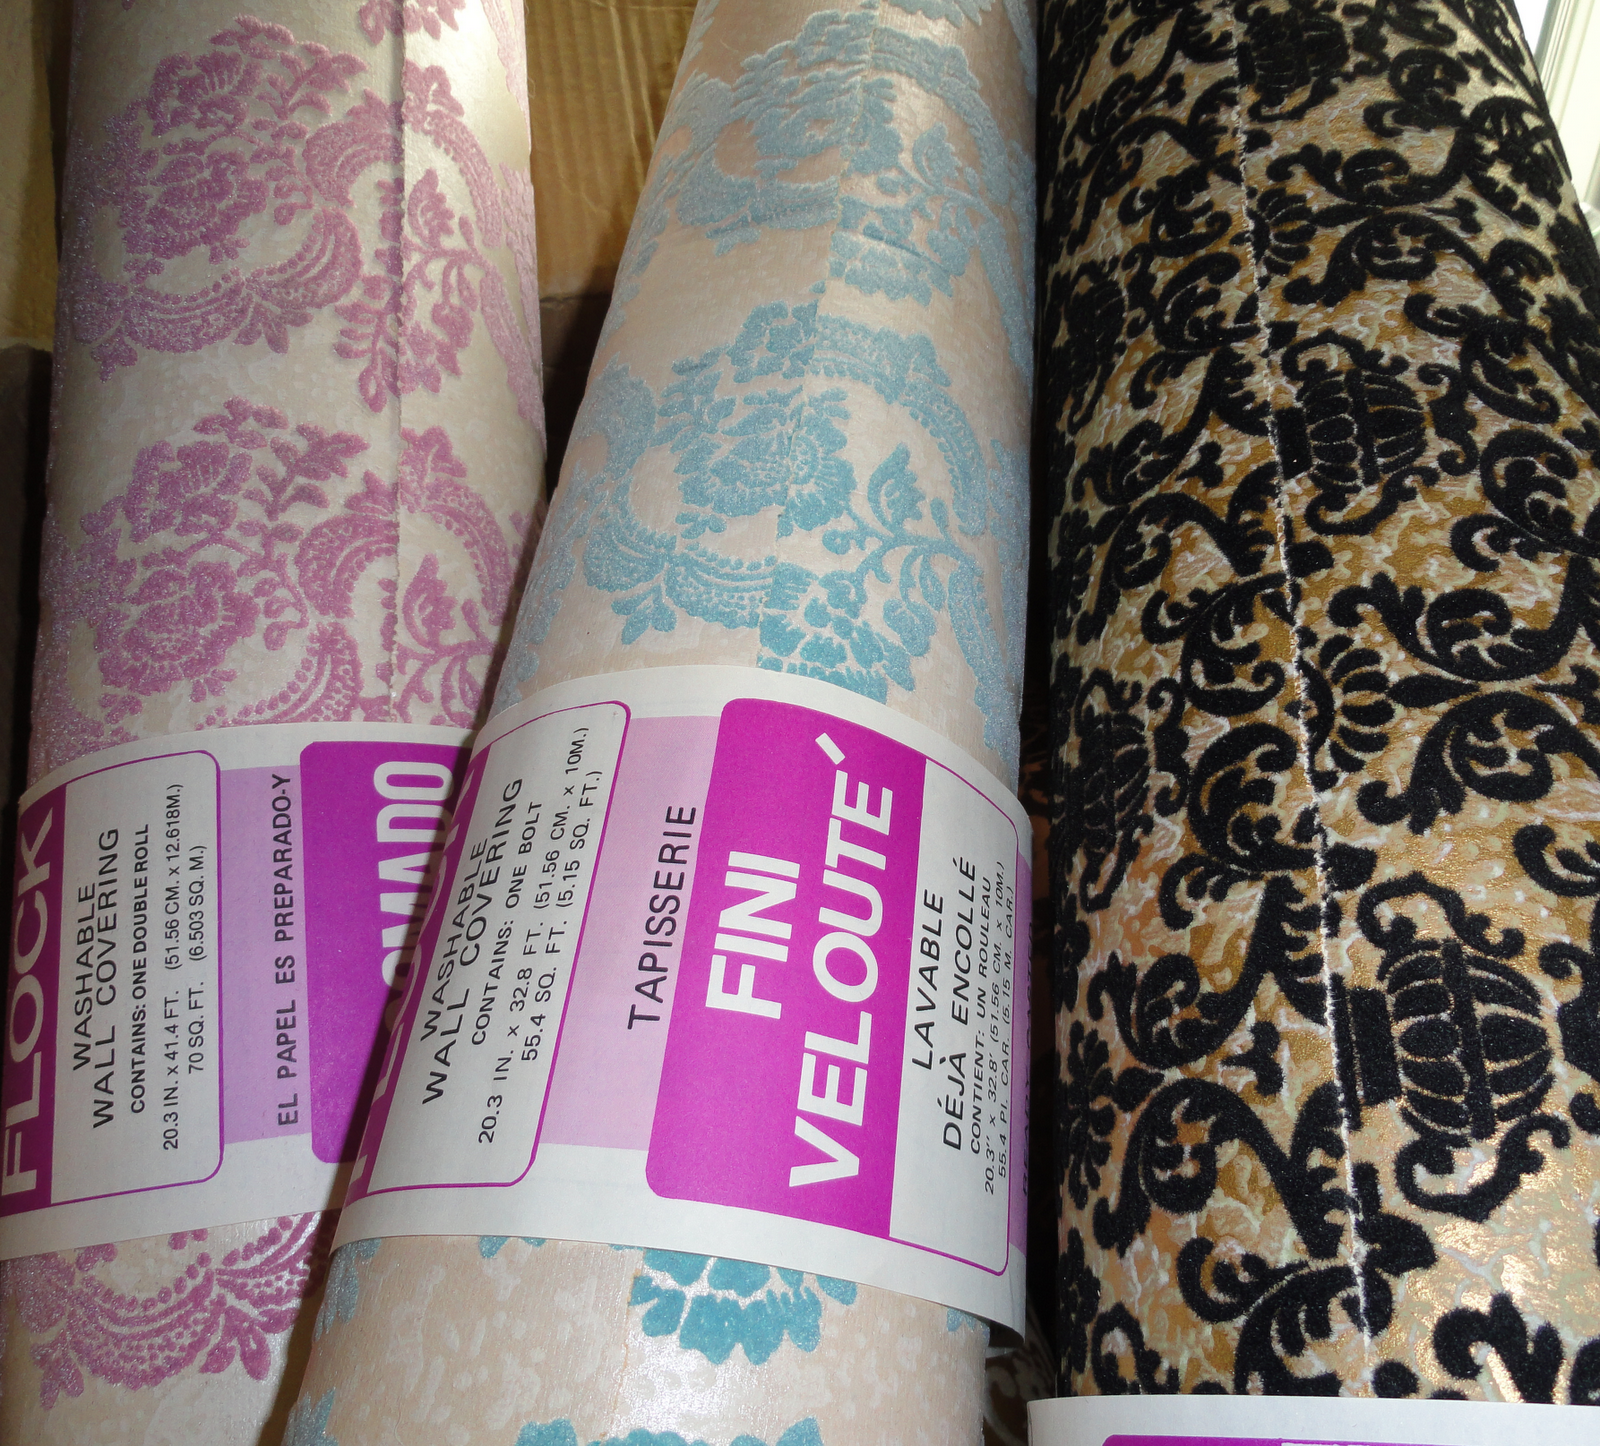 ... thrilled when I found new rolls of vintage flocked wallpapers at a